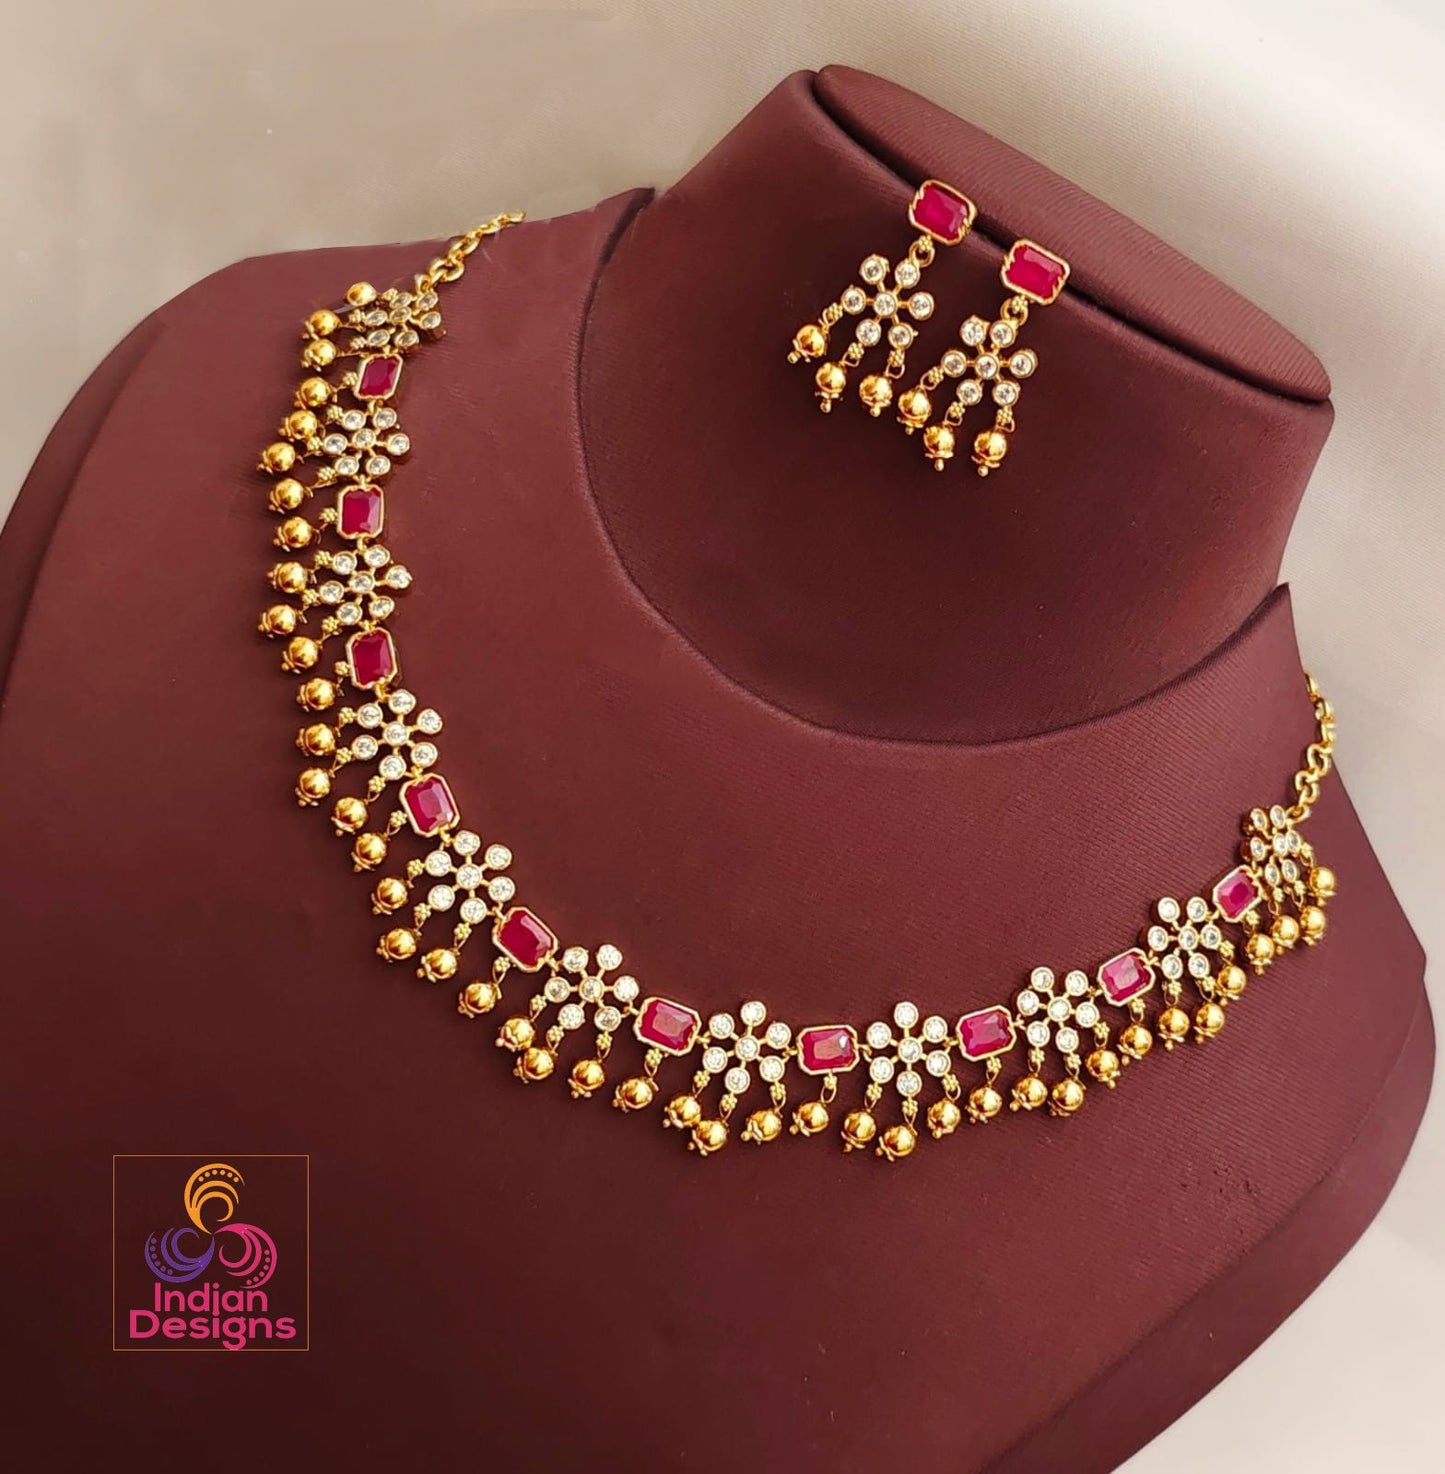 Gold plated necklace earring set | Simple gold choker | Gold plated Navratna stone necklace | Designer gold tone necklace South Indian style